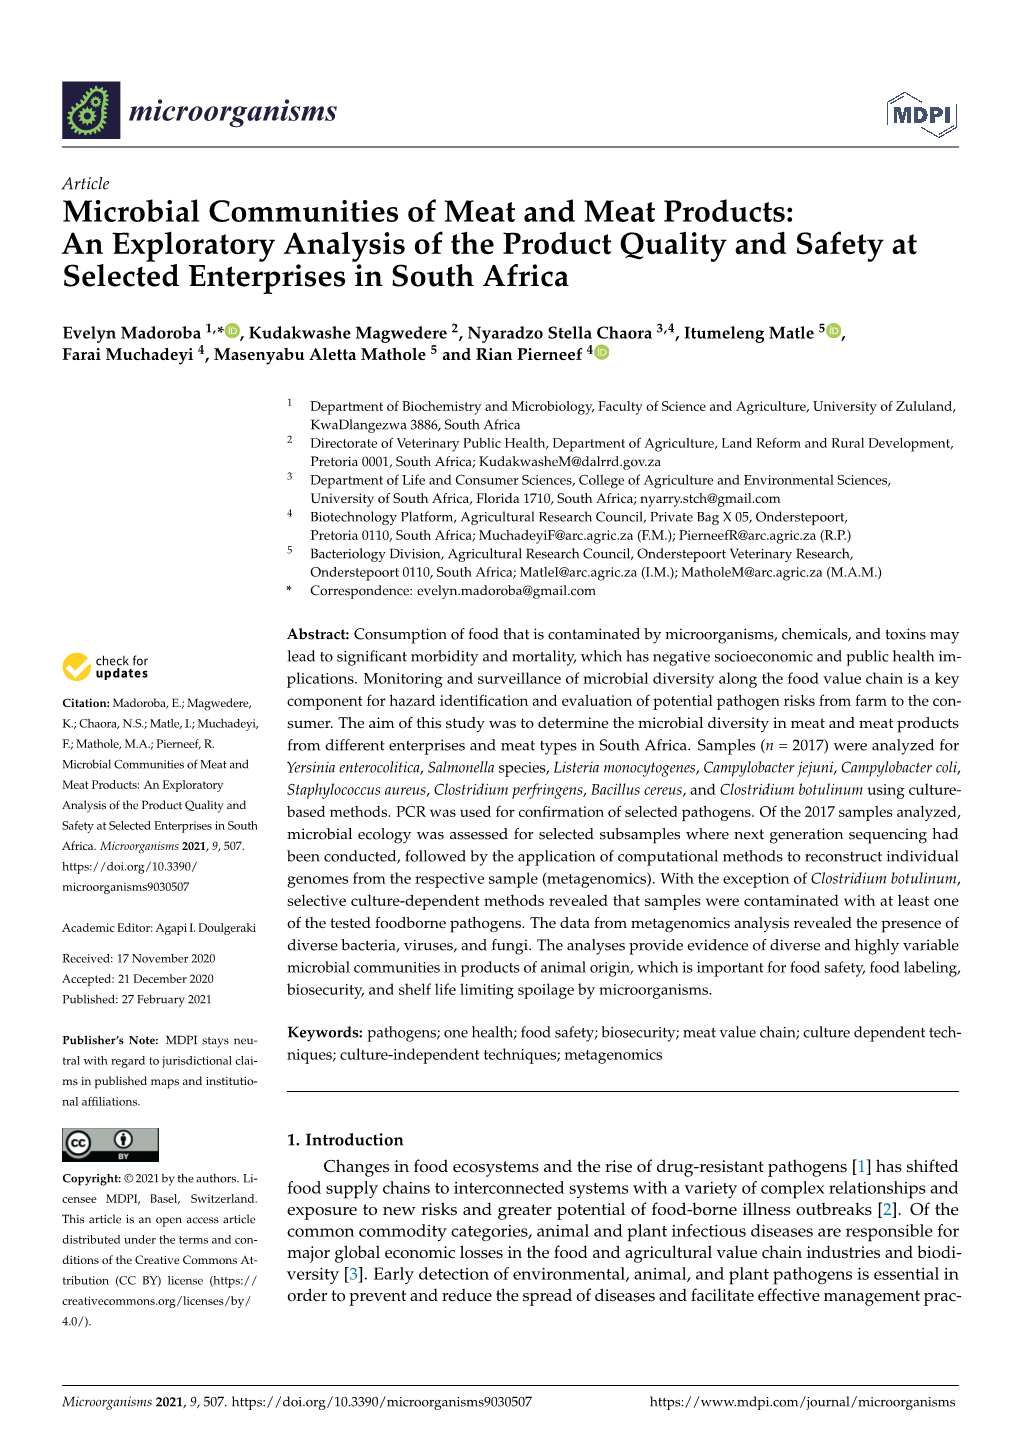 Microbial Communities of Meat and Meat Products: an Exploratory Analysis of the Product Quality and Safety at Selected Enterprises in South Africa